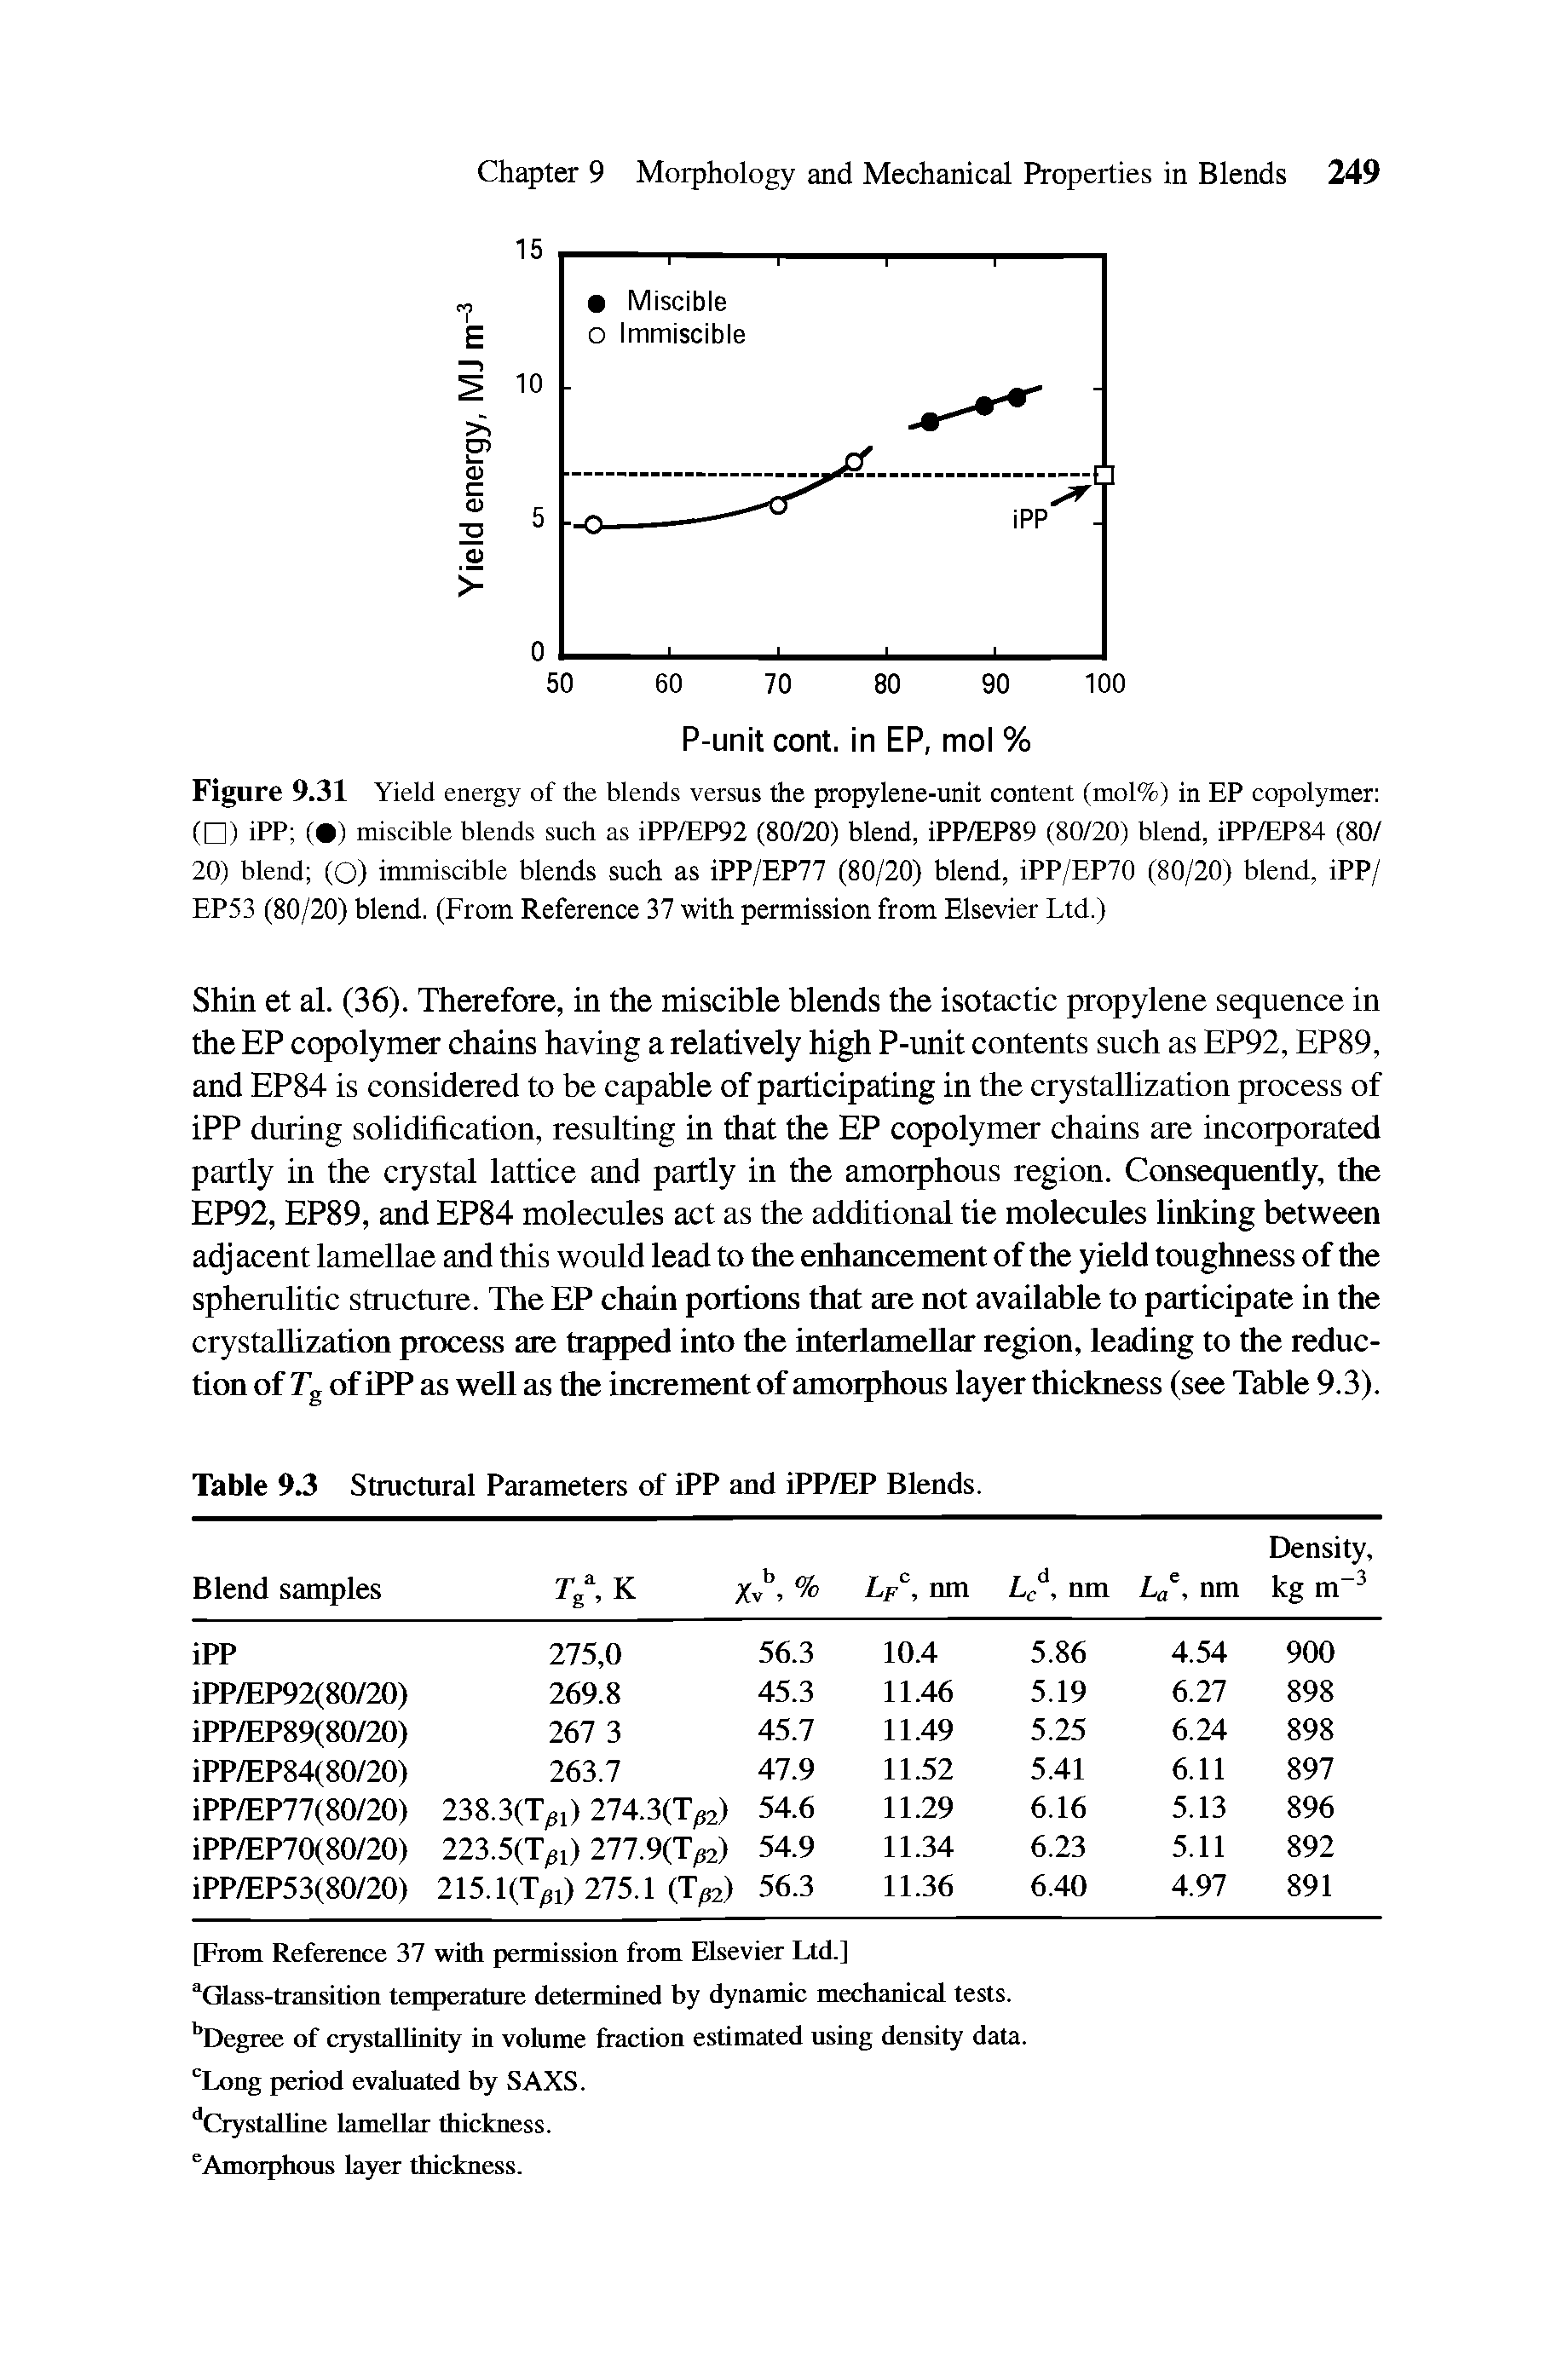 Figure 9.31 Yield energy of the blends versus the propylene-unit content (mol%) in EP copolymer ( ) iPP ( ) miscible blends such as 1PP/EP92 (80/20) blend, iPP/EP89 (80/20) blend, iPP/EP84 (80/ 20) blend (O) immiscible blends such as iPP/EP77 (80/20) blend, iPP/EP70 (80/20) blend, iPP/ EP53 (80/20) blend. (From Reference 37 with permission from Elsevier Ltd.)...